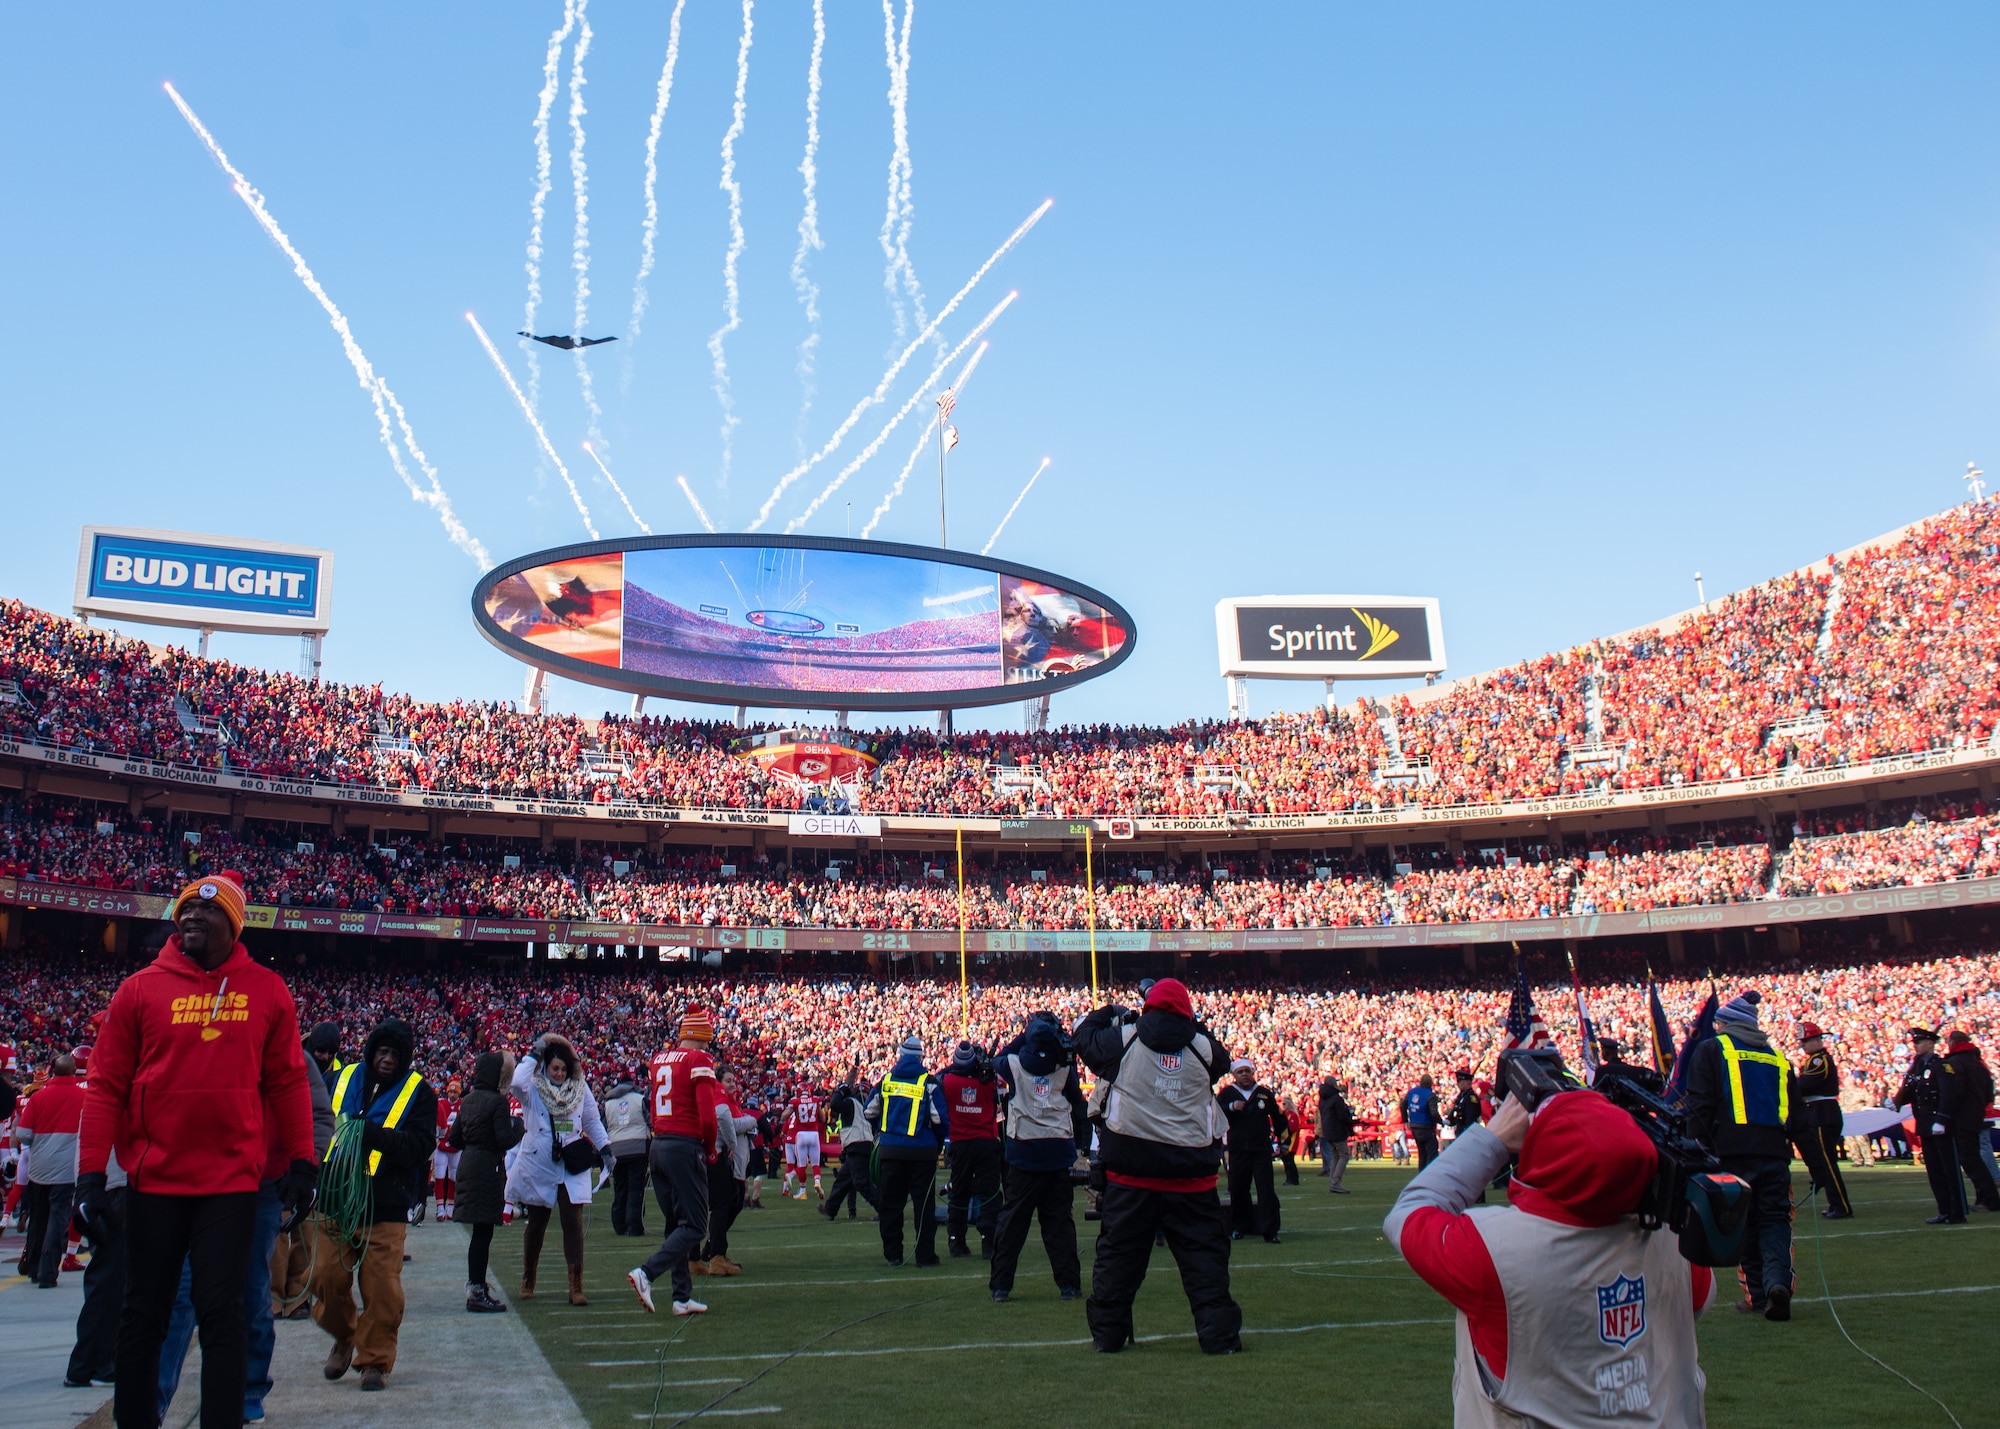 A B-2 Spirit Stealth Bomber assigned to the 509th Bomb at Whiteman Air Force, Missouri, ﬂies over Arrowhead Stadium during the AFC Championship game on Jan 19, 2020, Kansas City, Missouri. The Kansas City Chiefs and Whiteman AFB have been long standing partners and work on a variety of events throughout the year to strengthen bonds between the local community and the military. (U.S. Air Force photo by Senior Airman Thomas Barley)